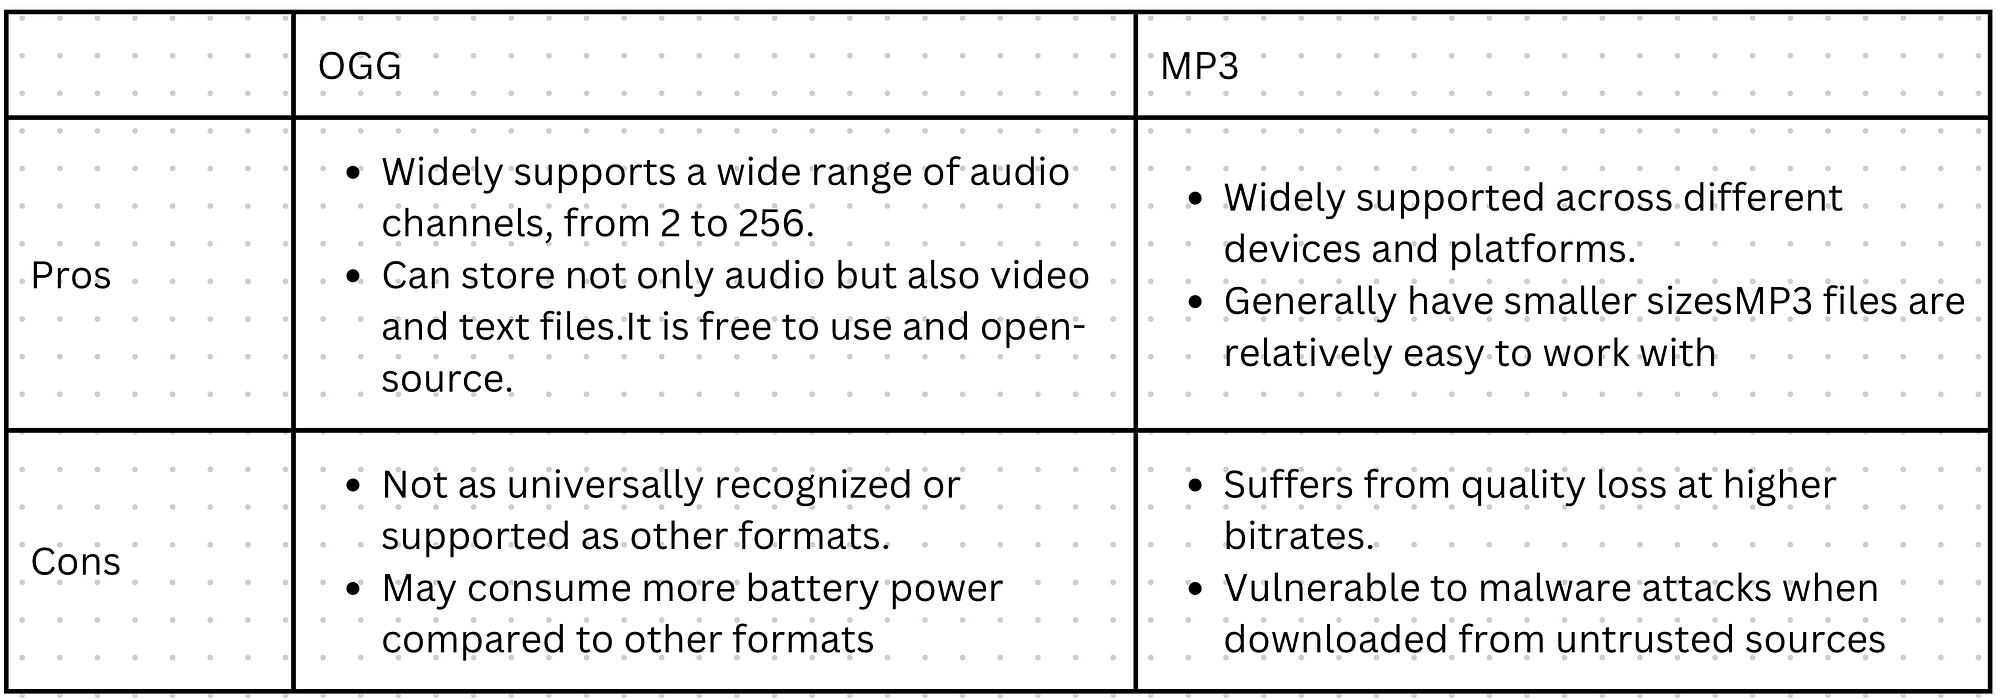 Pros and Cons of OGG and MP3